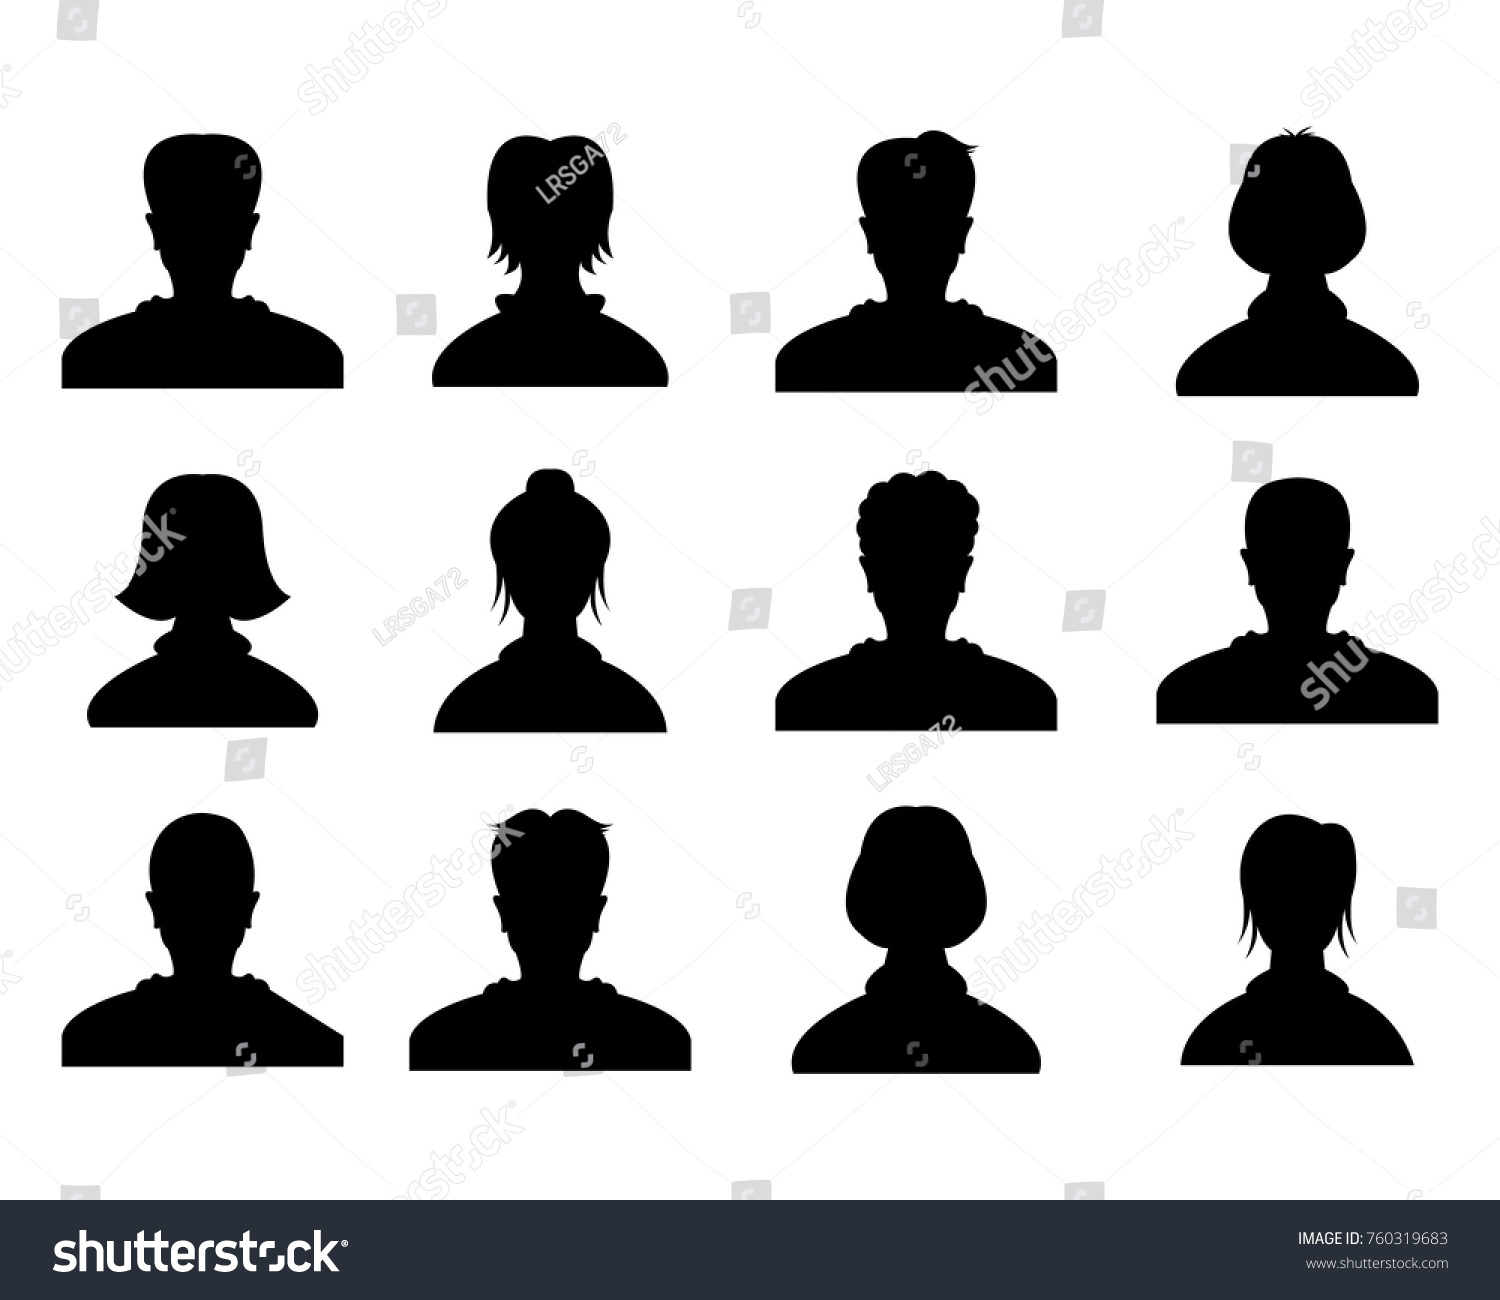 Male Female Head Silhouettes Avatar Profile Stock Vector (Royalty Free ...